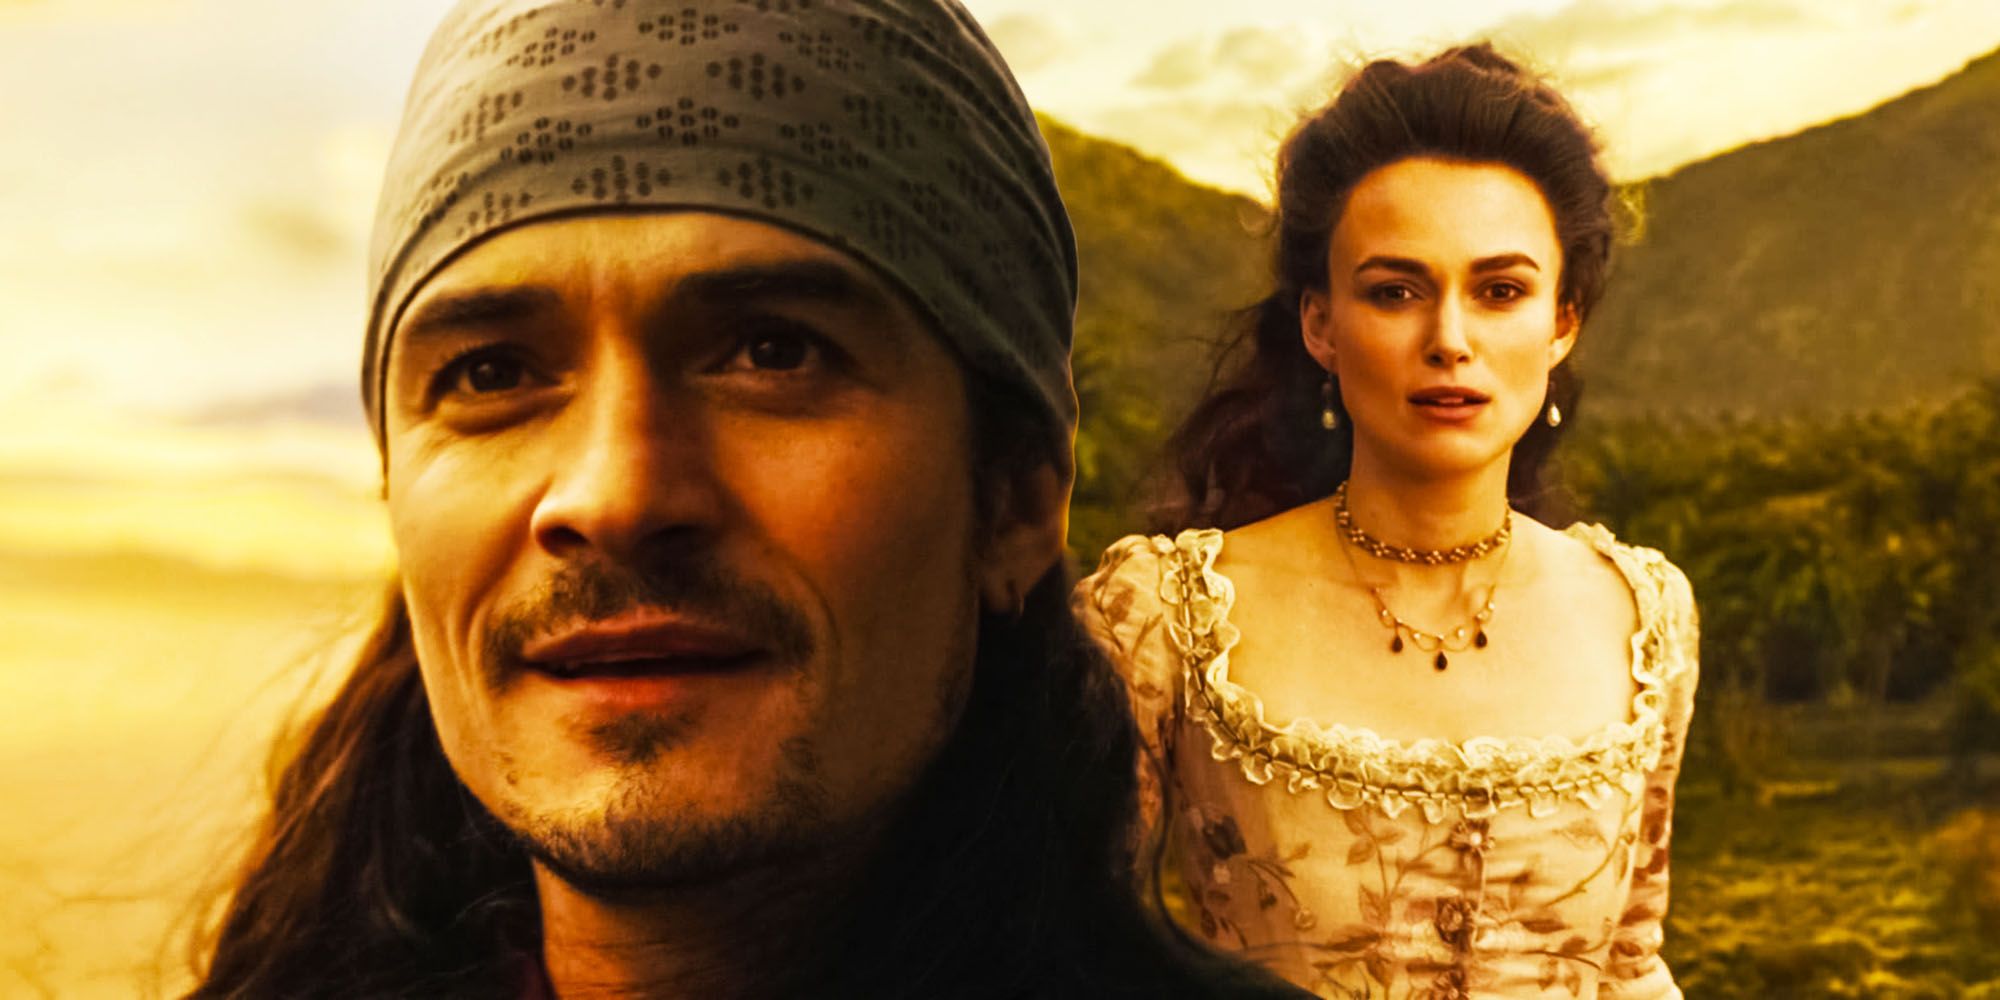 Will Turner and Elizabeth Swan in Pirates of the Caribbean